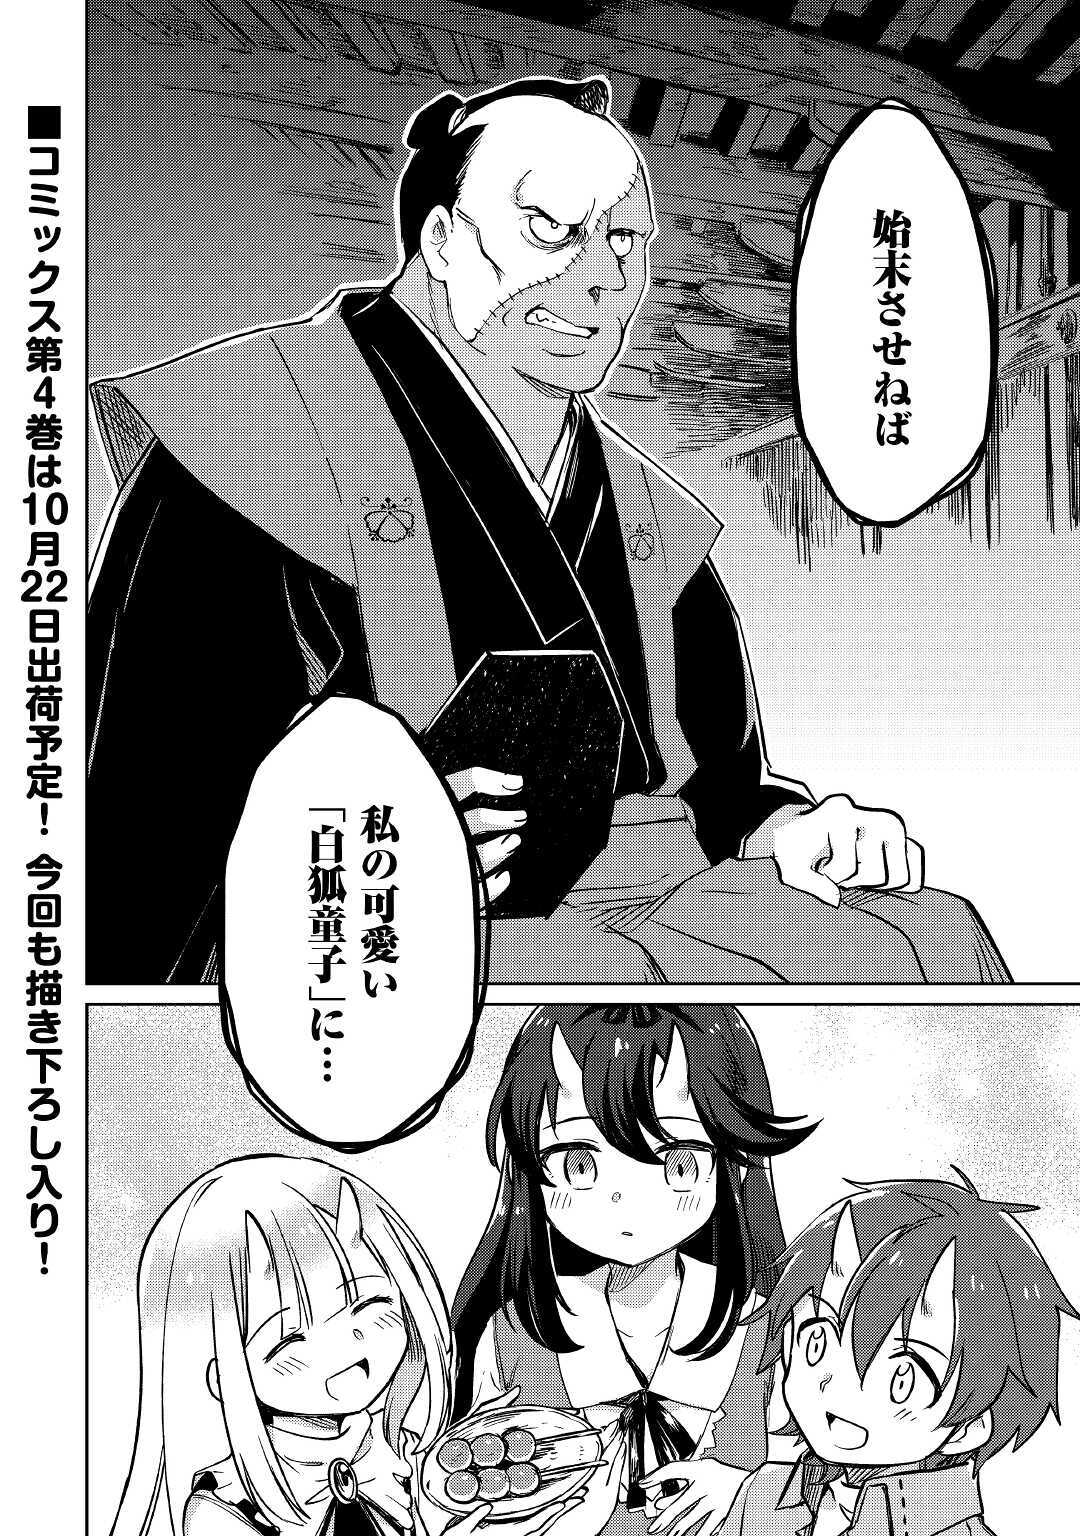 The Former Structural Researcher’s Story of Otherworldly Adventure 第29話 - Page 40